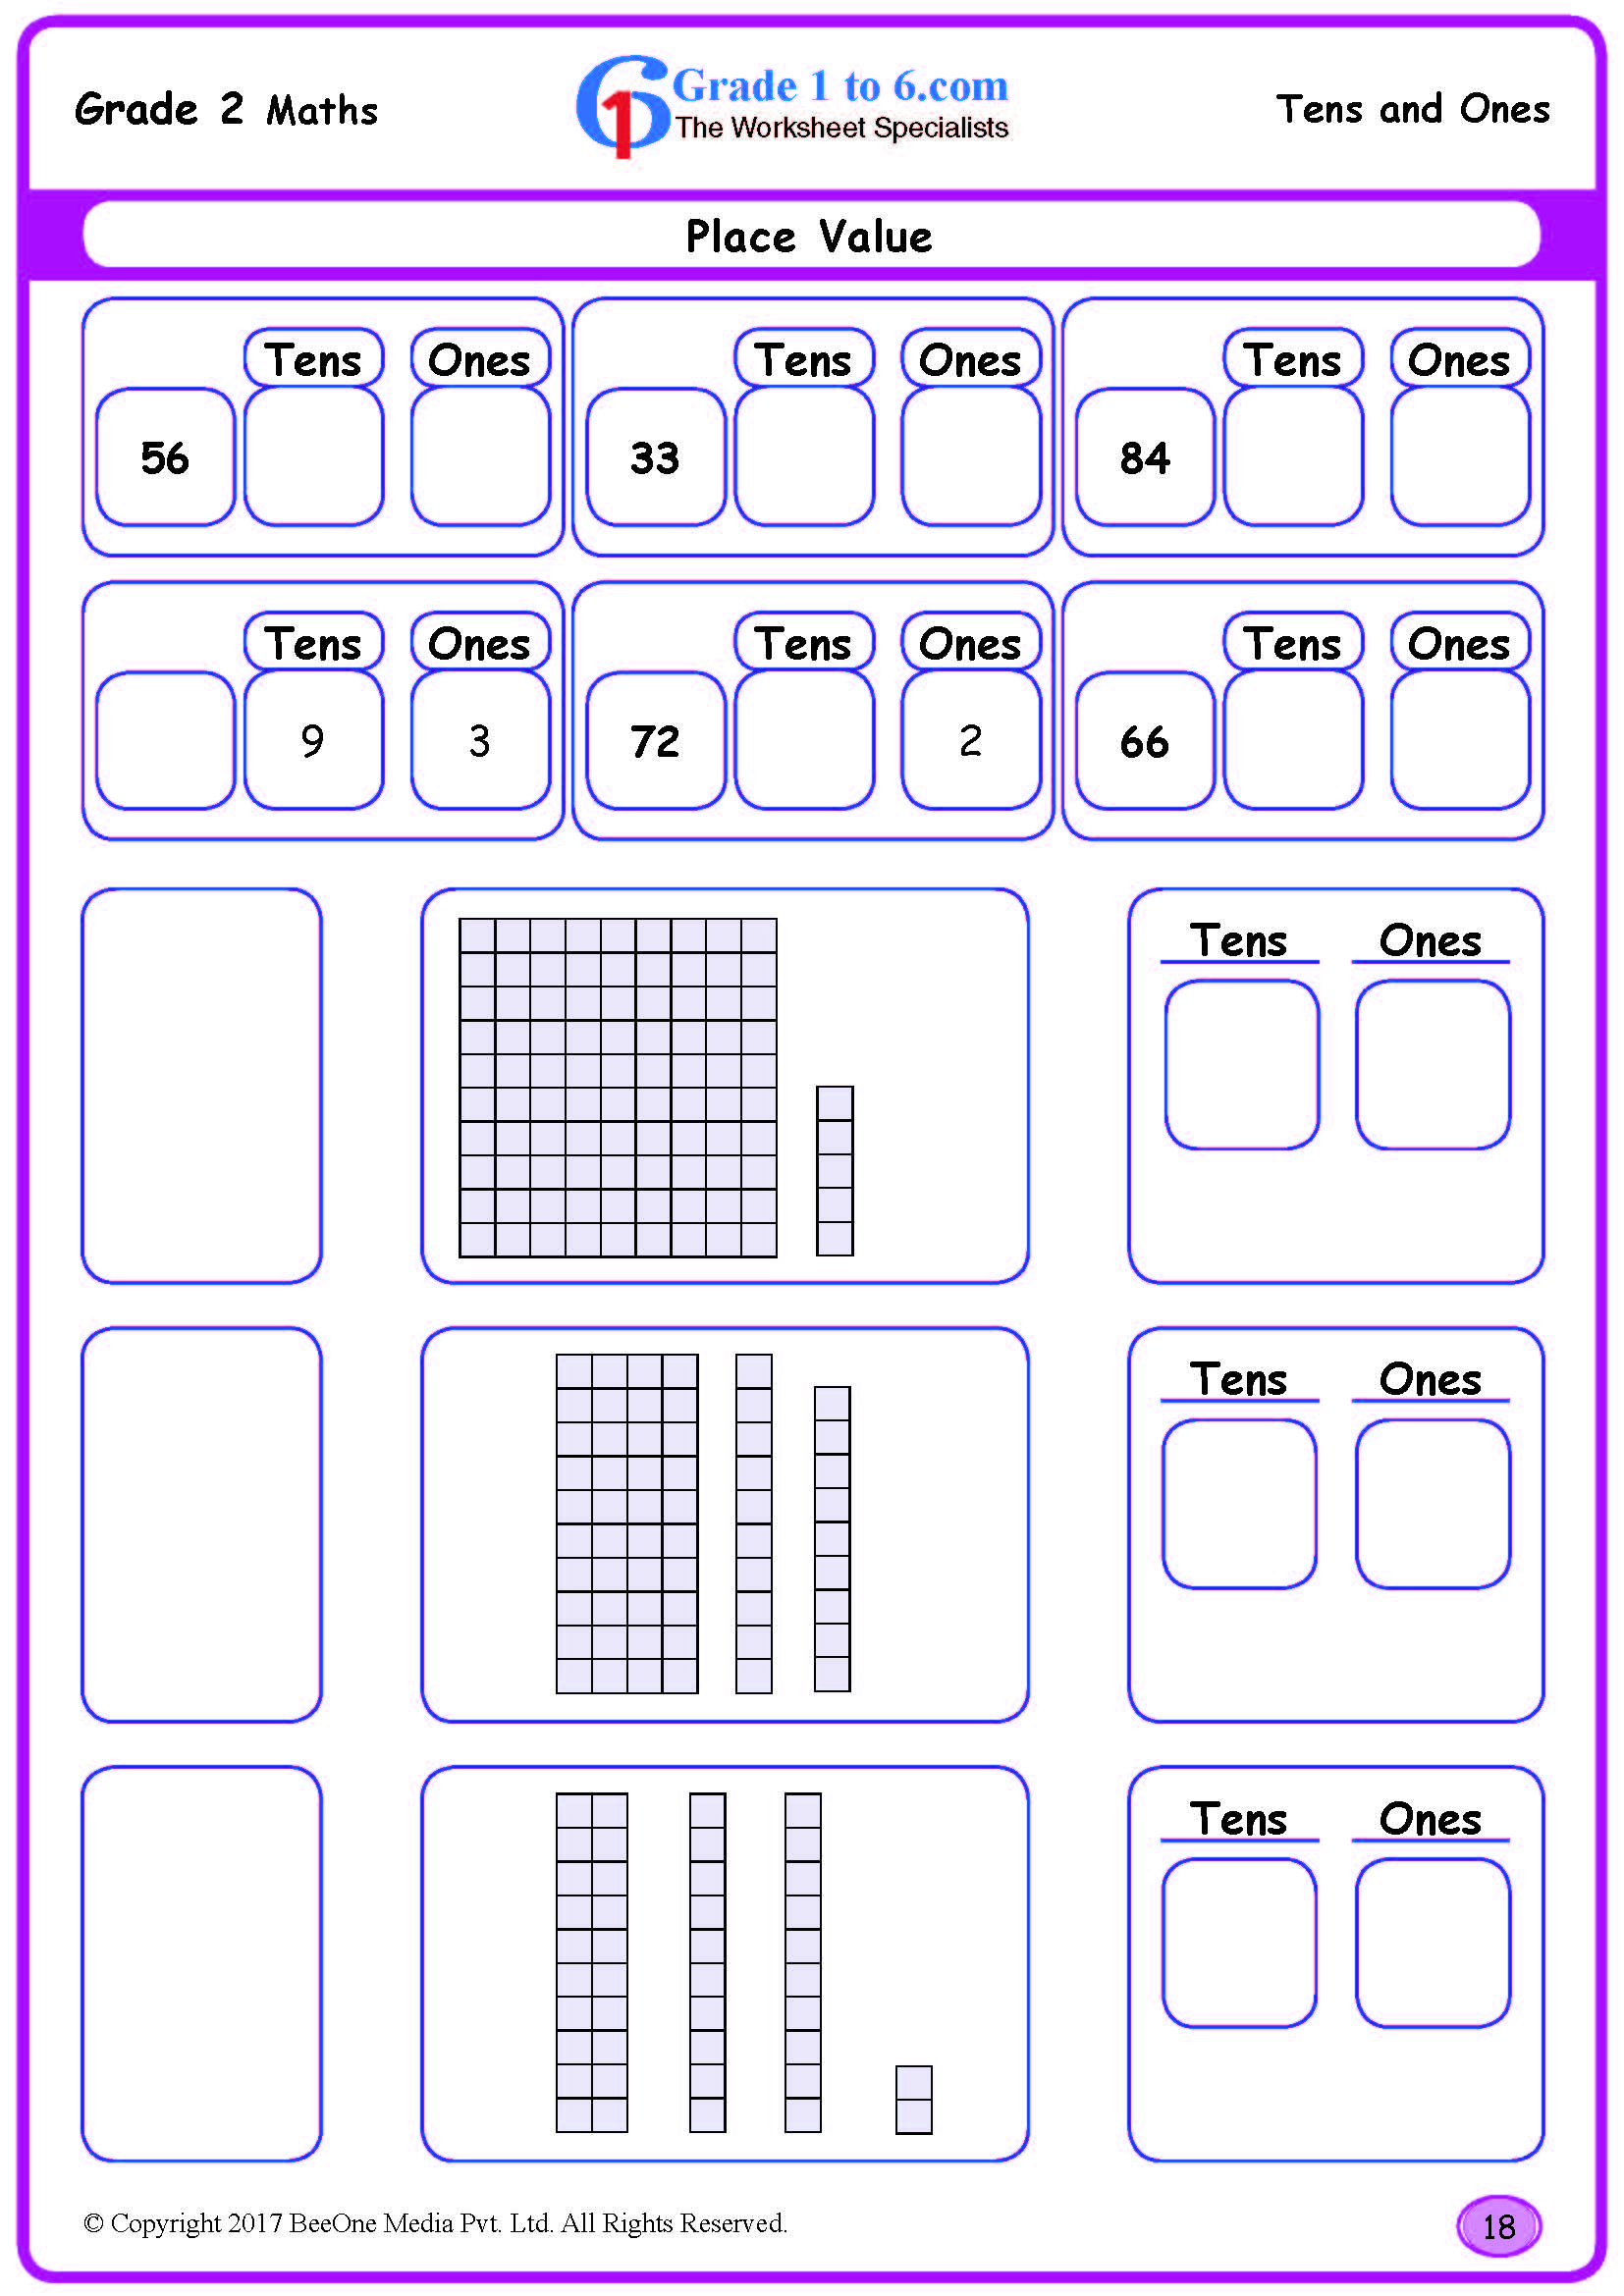 2nd-grade-place-value-worksheets-www-grade1to6